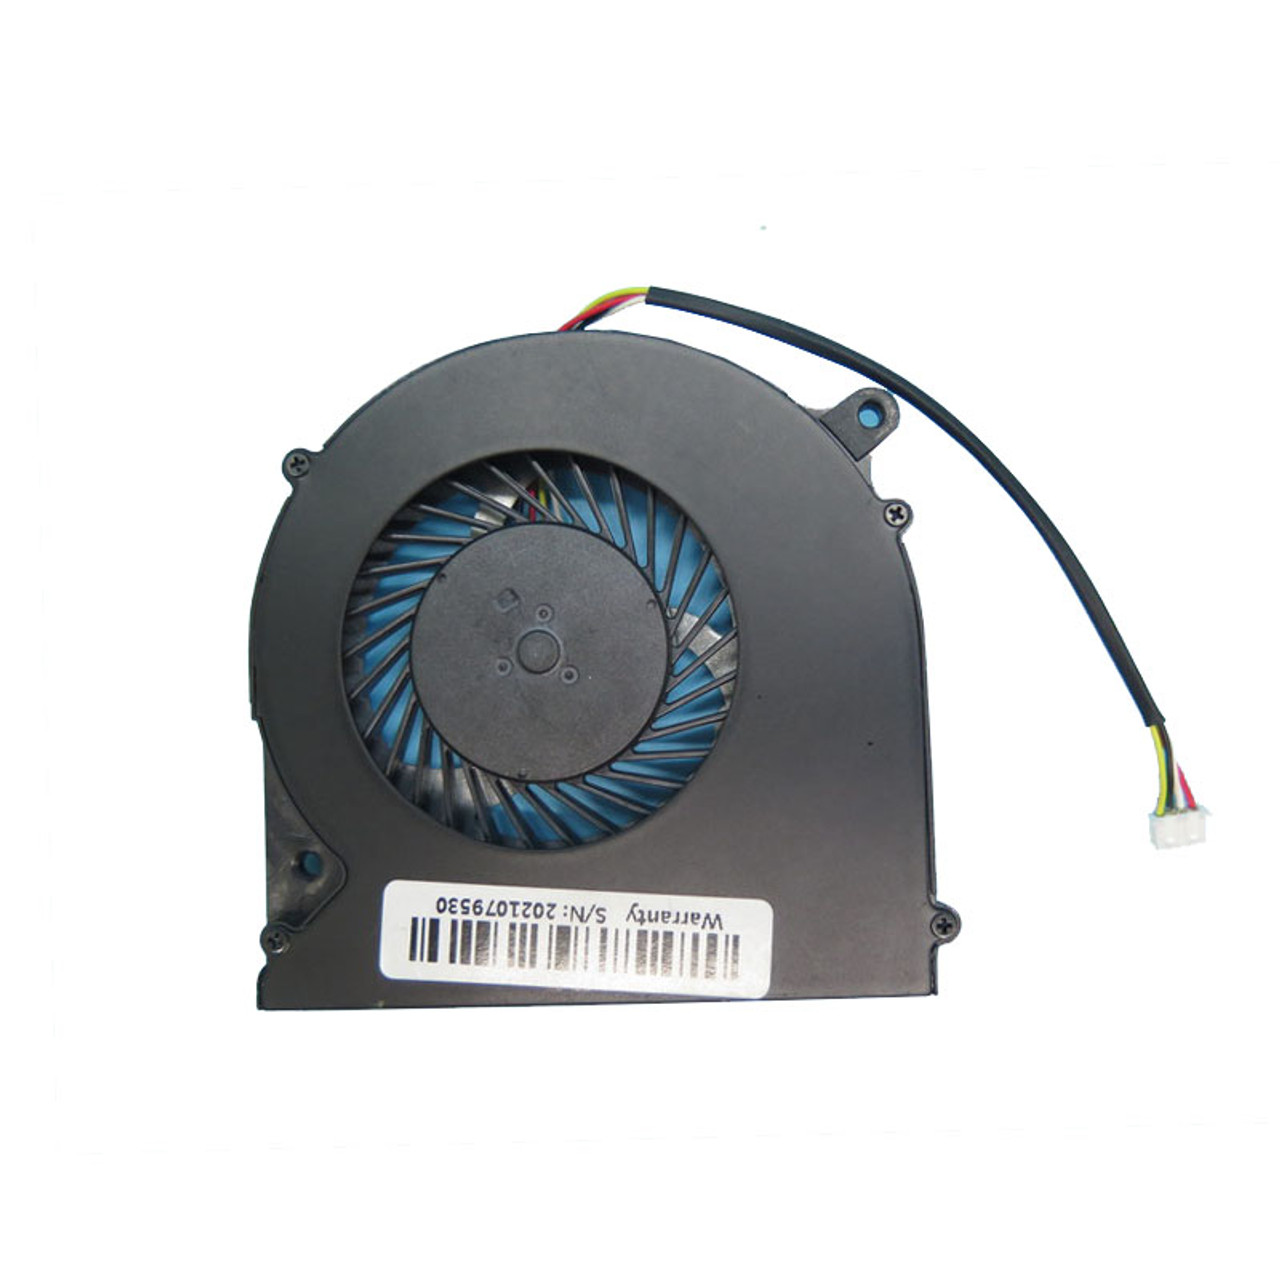 Laptop CPU Fan For Tsukumo eX.computer note N1505K N1505K-310/T  N1505K-310T/8G N1505K-520/T N1505K-520/T2 N1505K-730/T N1505K-730/T2 NJ51CU  DC5V 0.5A ...